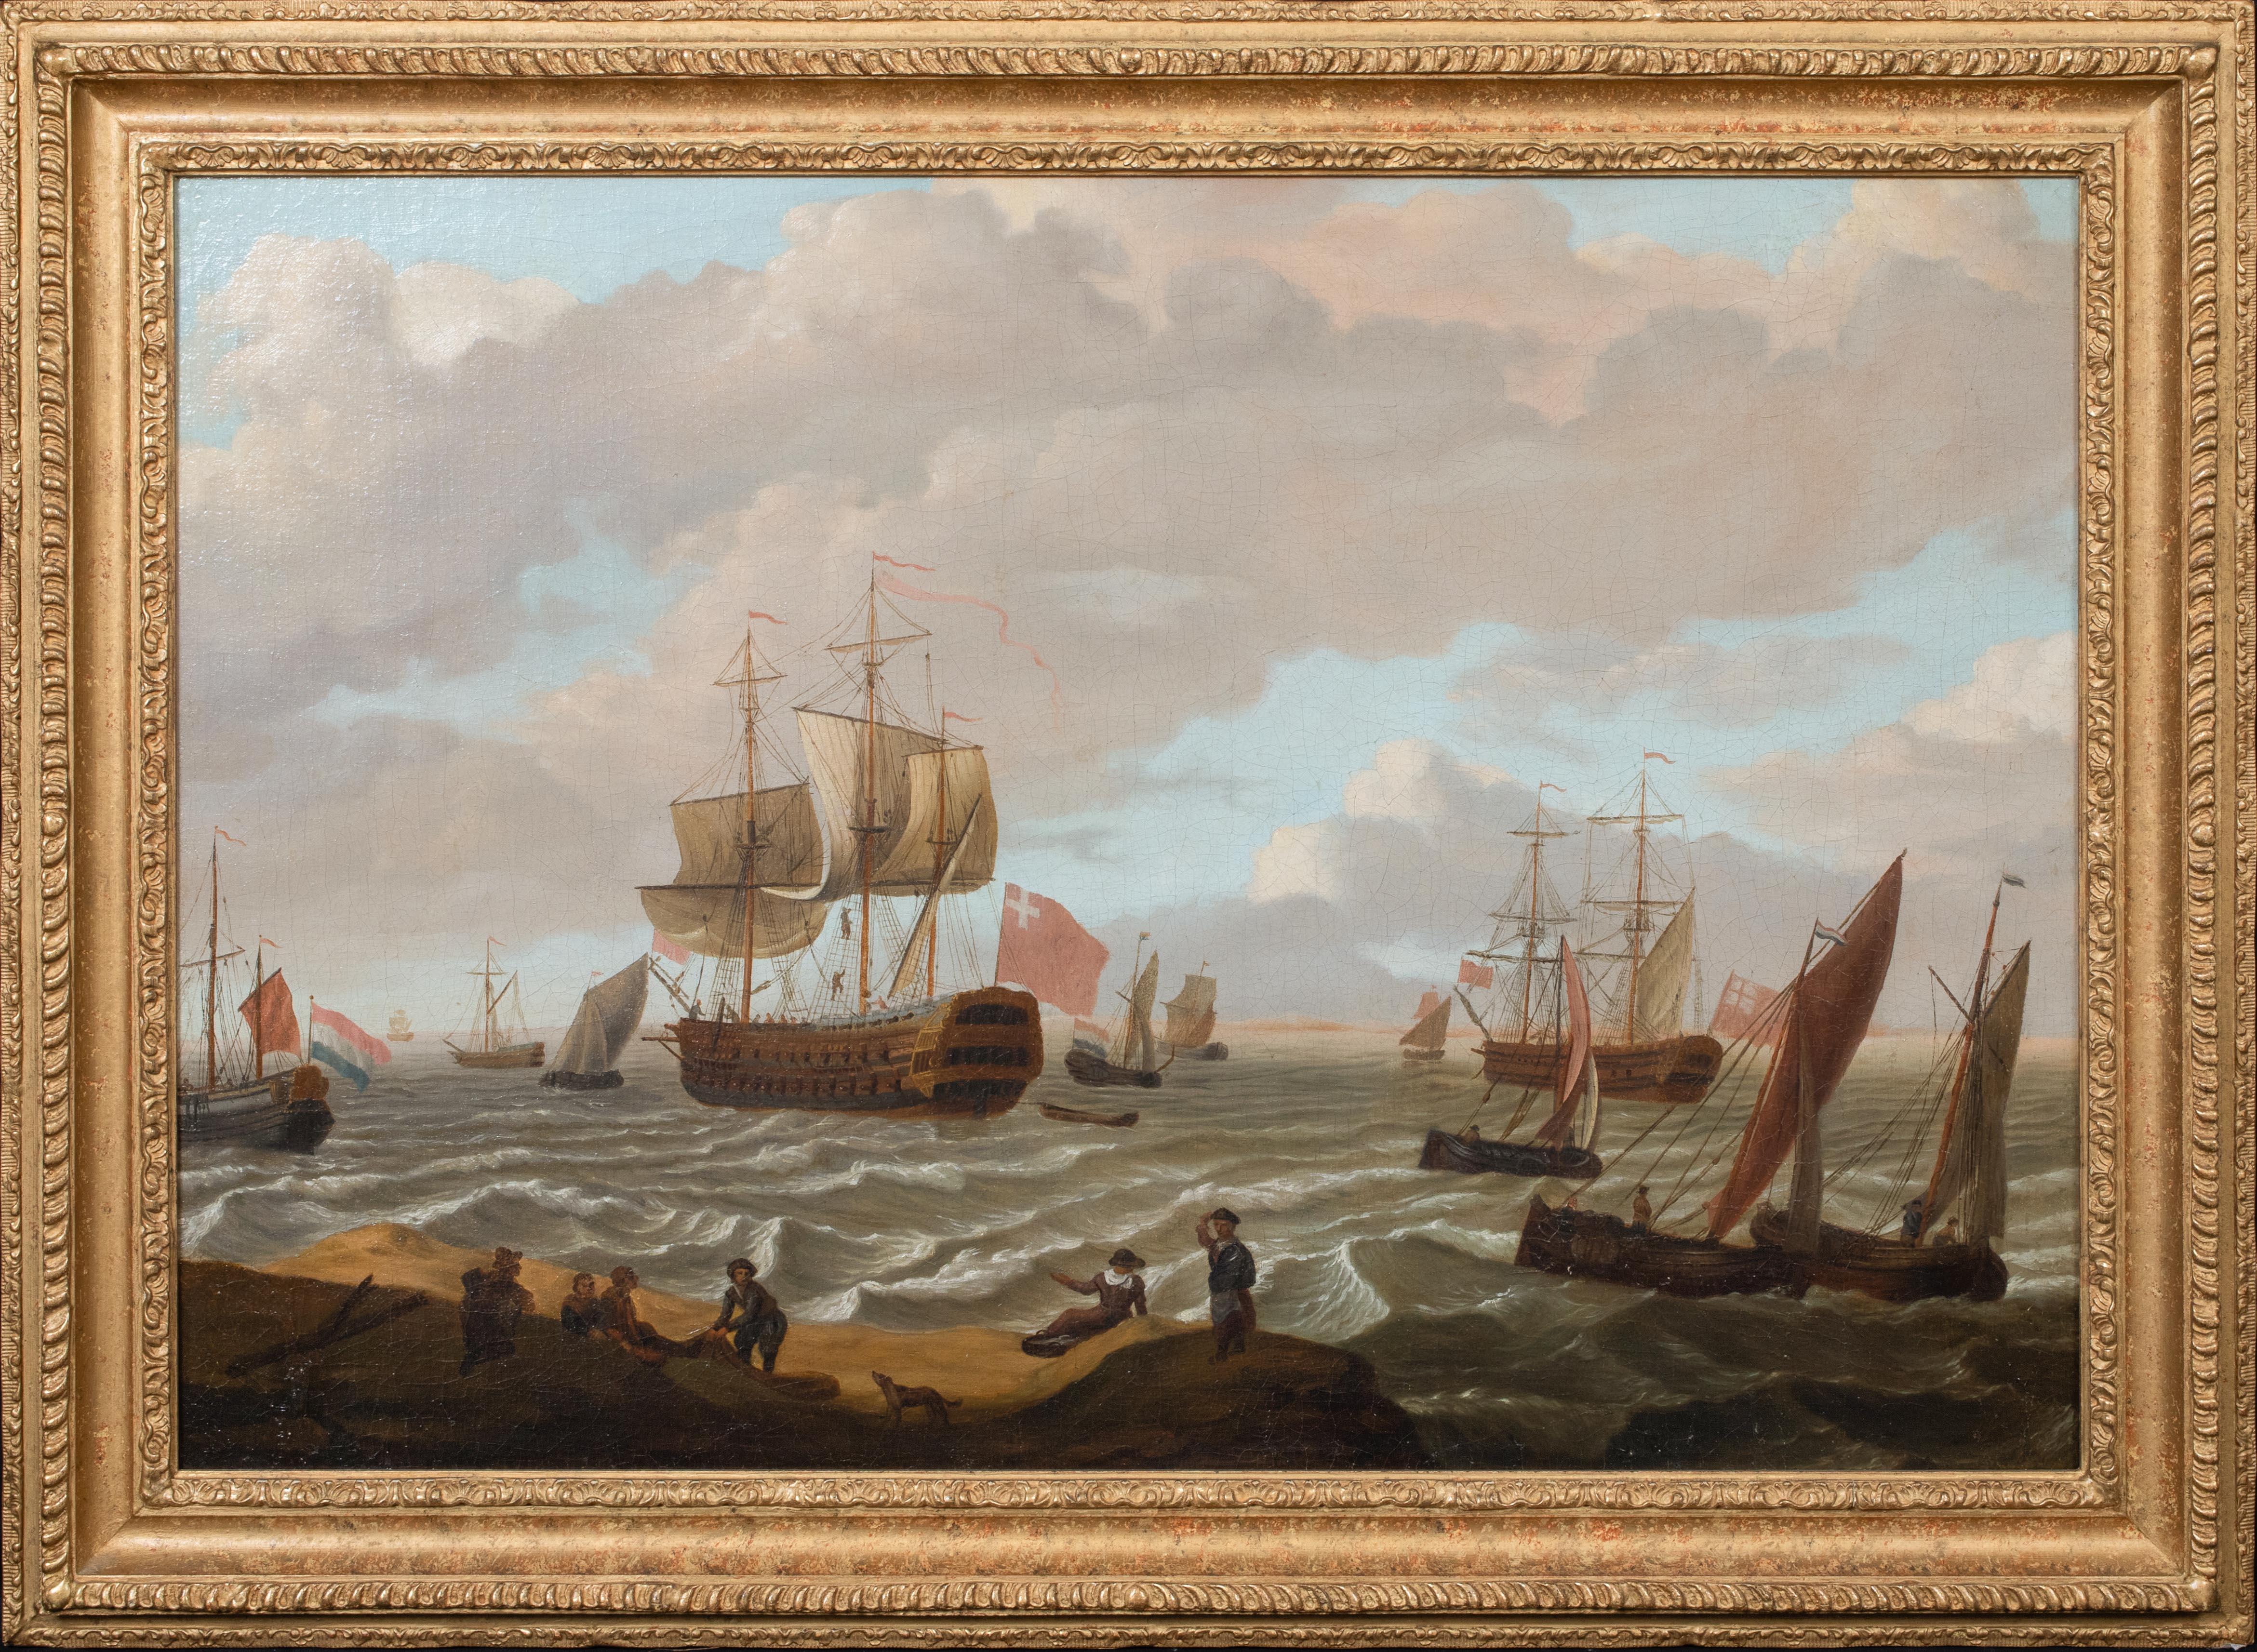 Dutch Fishing Boats & Naval Ships Offshore, 17th Century   - Painting by Ludolf Bakhuisen